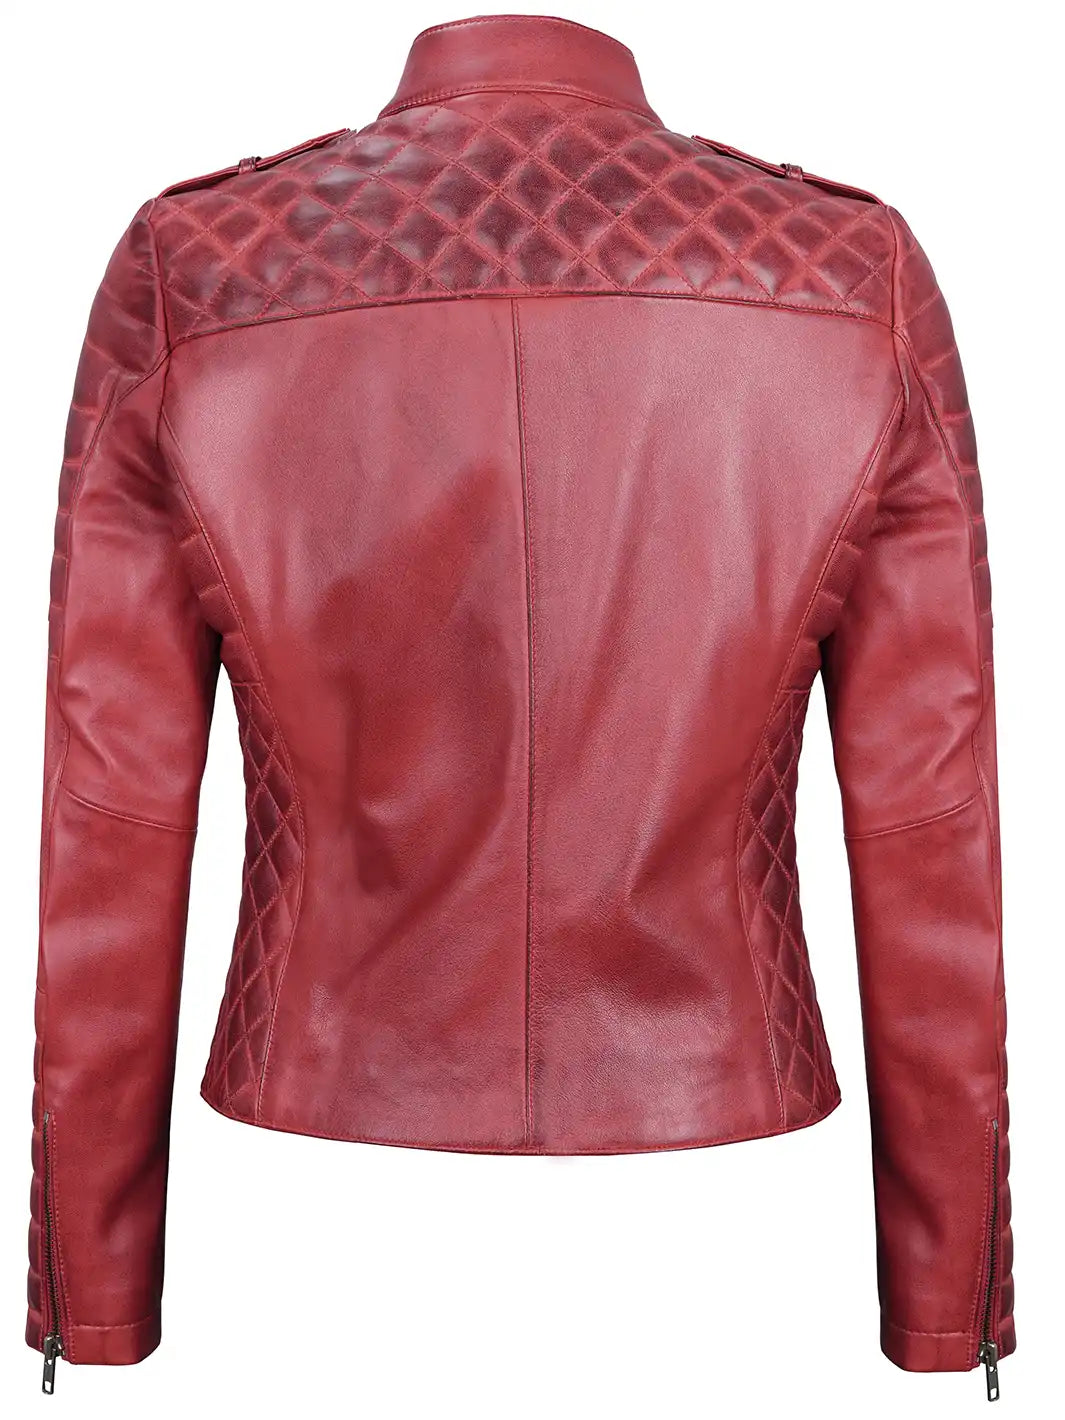 Women red leather jacket